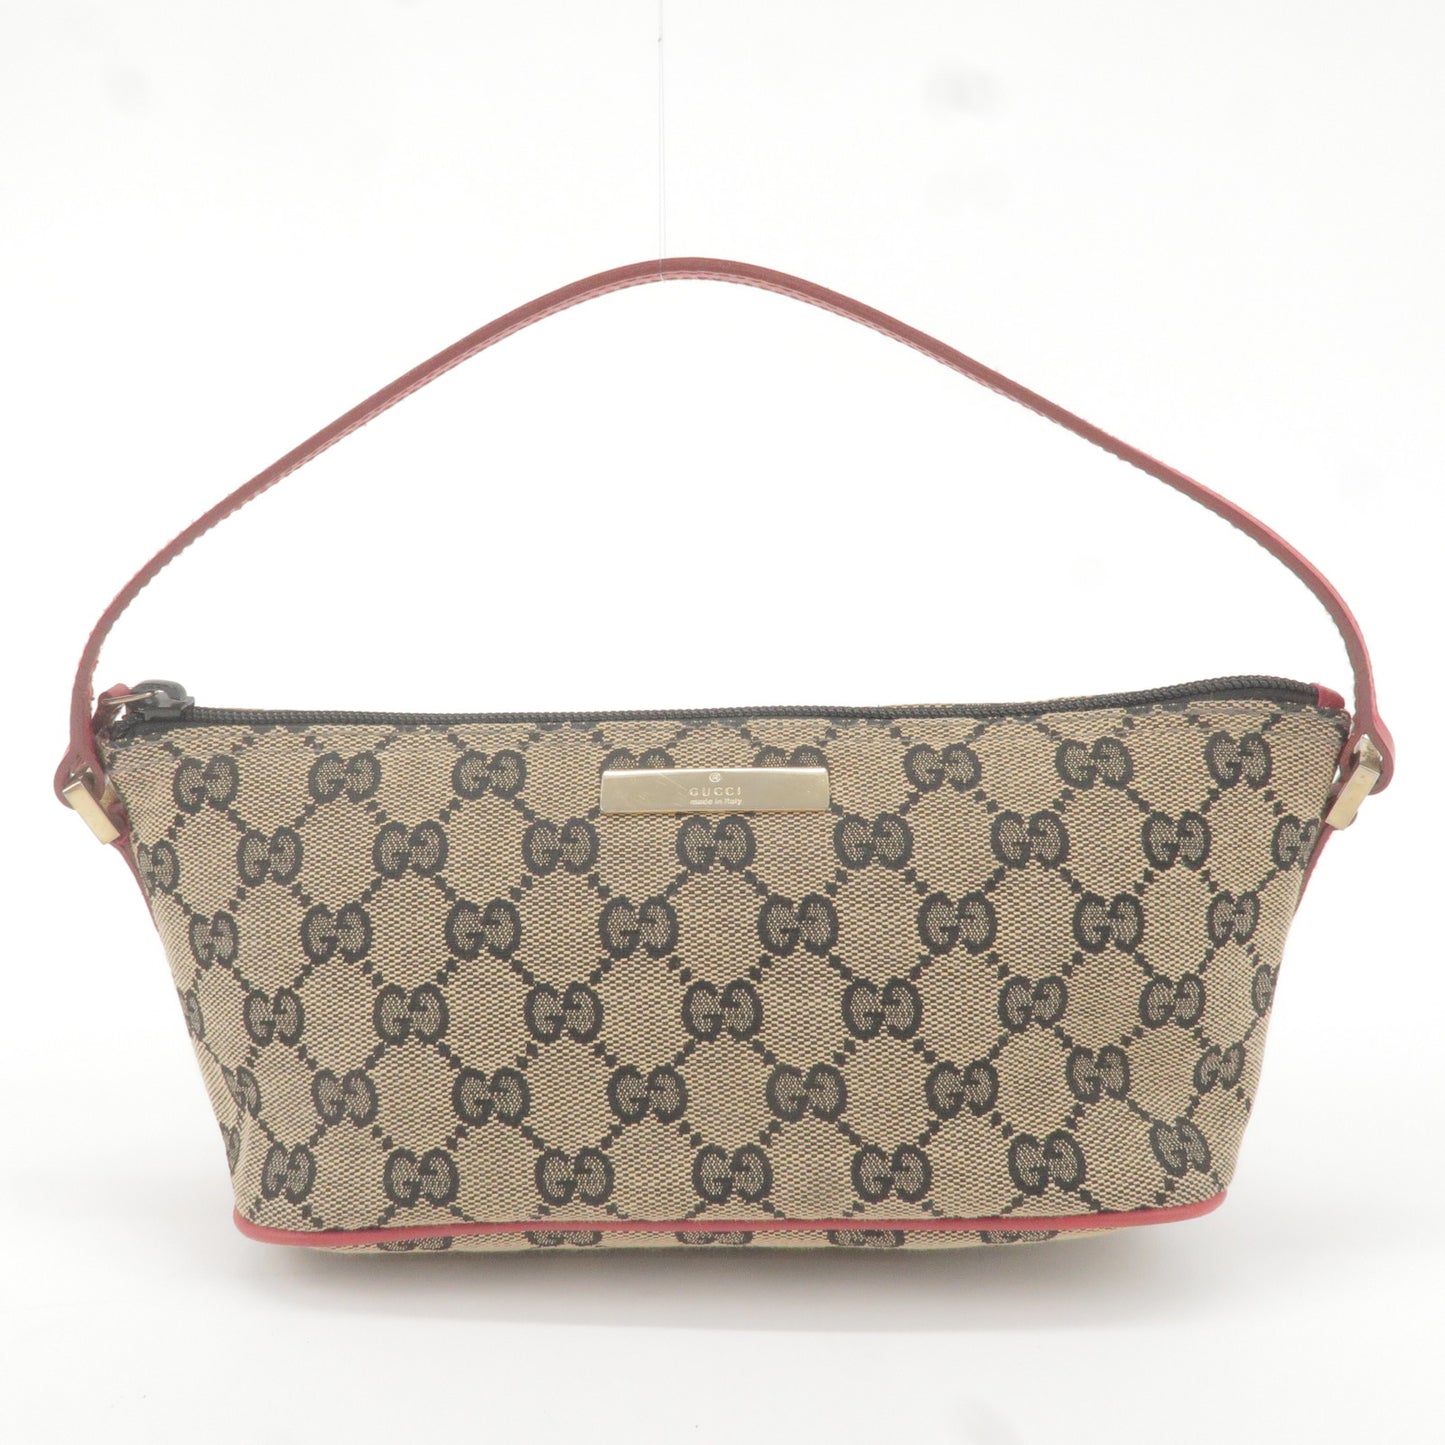 GUCCI GG Canvas Leather Boat Bag Hand Bag Black Red 039.1103